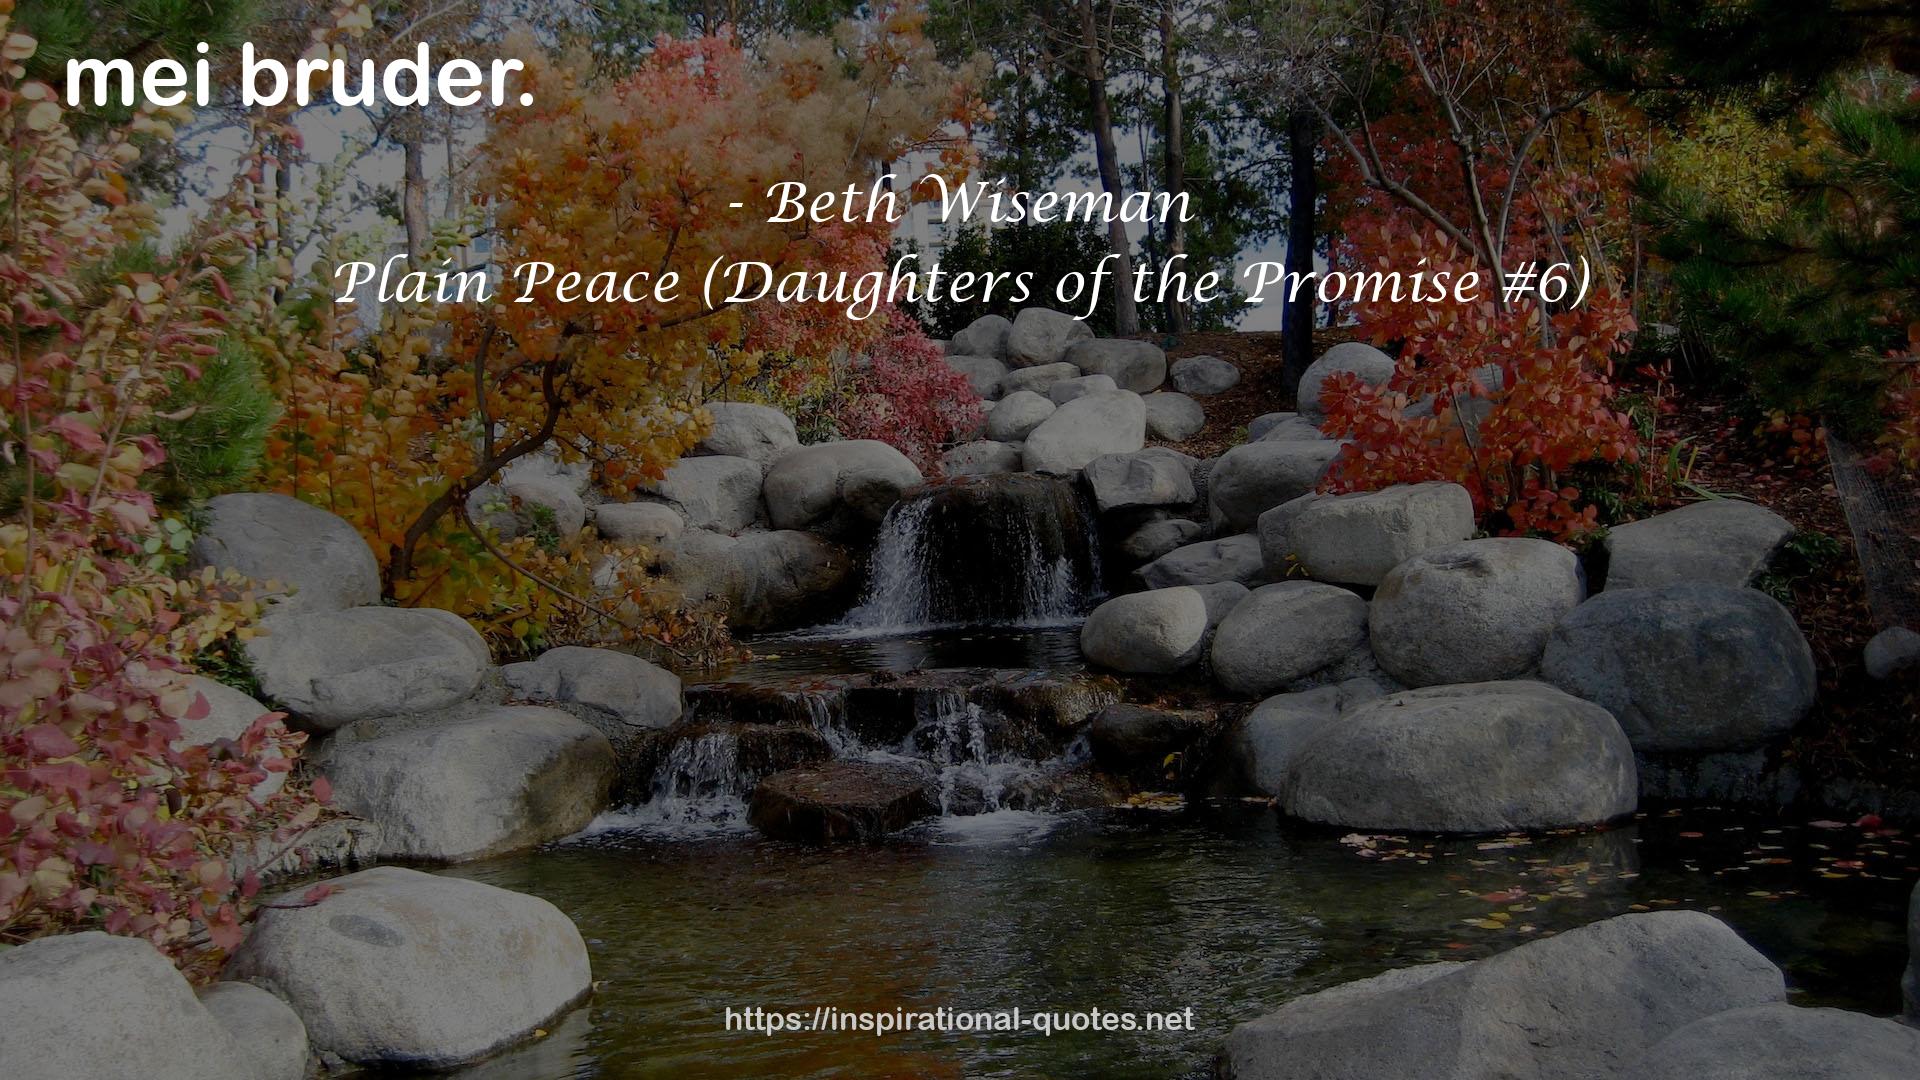 Plain Peace (Daughters of the Promise #6) QUOTES